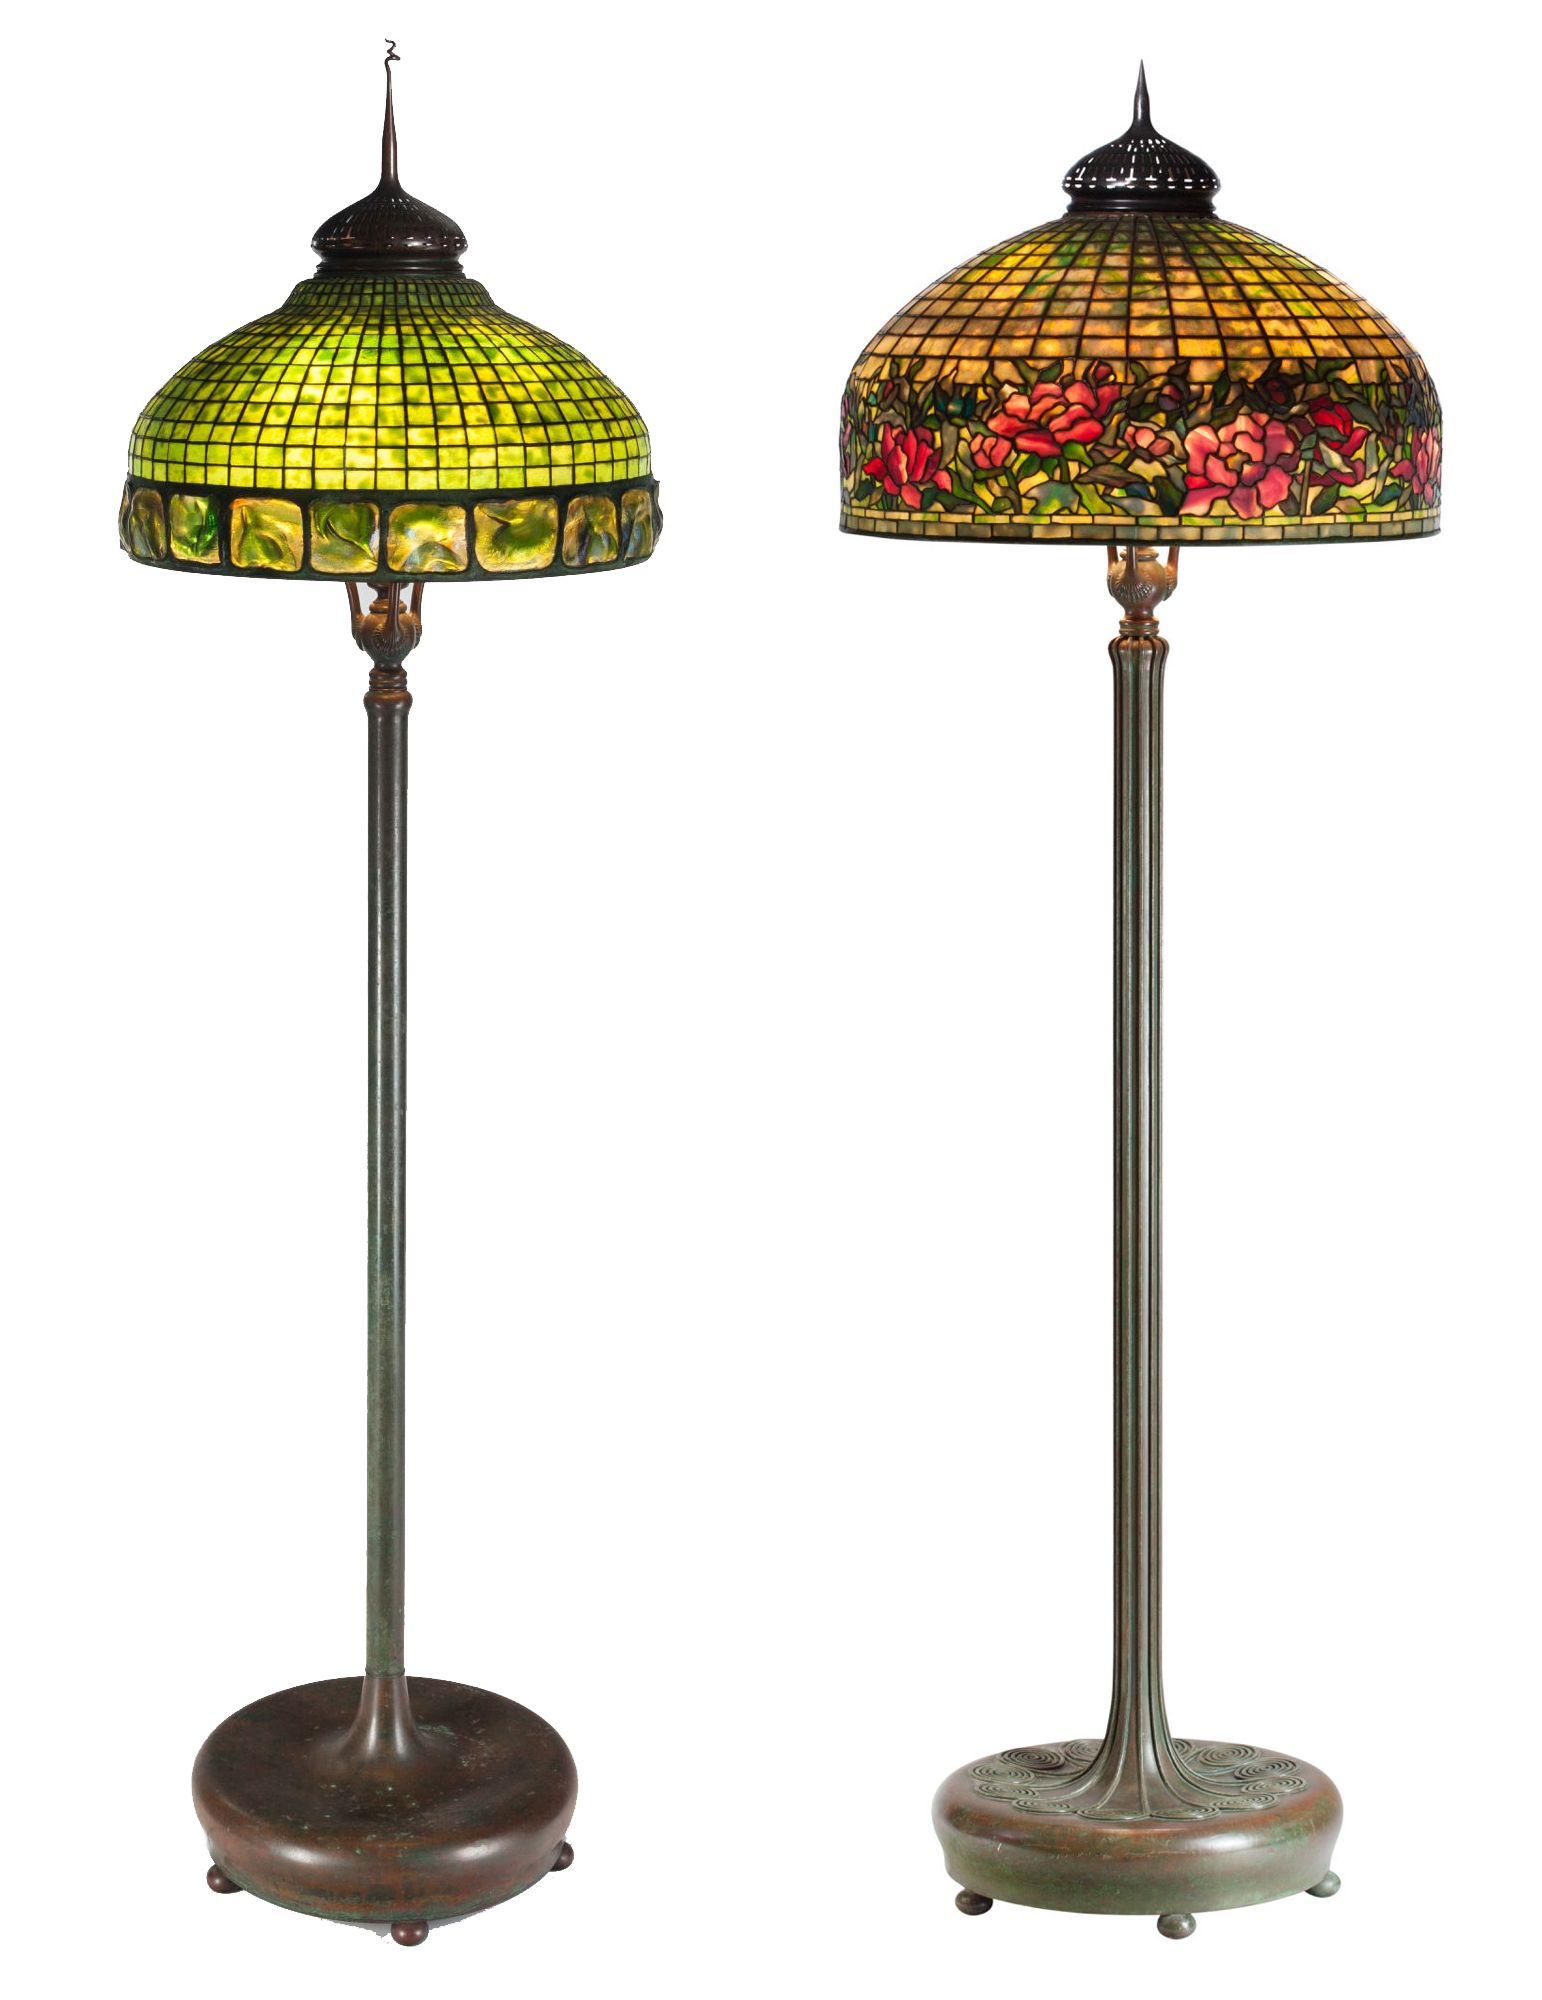 Widely Used Tiffany, Gallé Lamps Shine On 1,800 Lot Heritage Auction June 19 21 Within 74 Inch Floor Lamps (View 8 of 15)